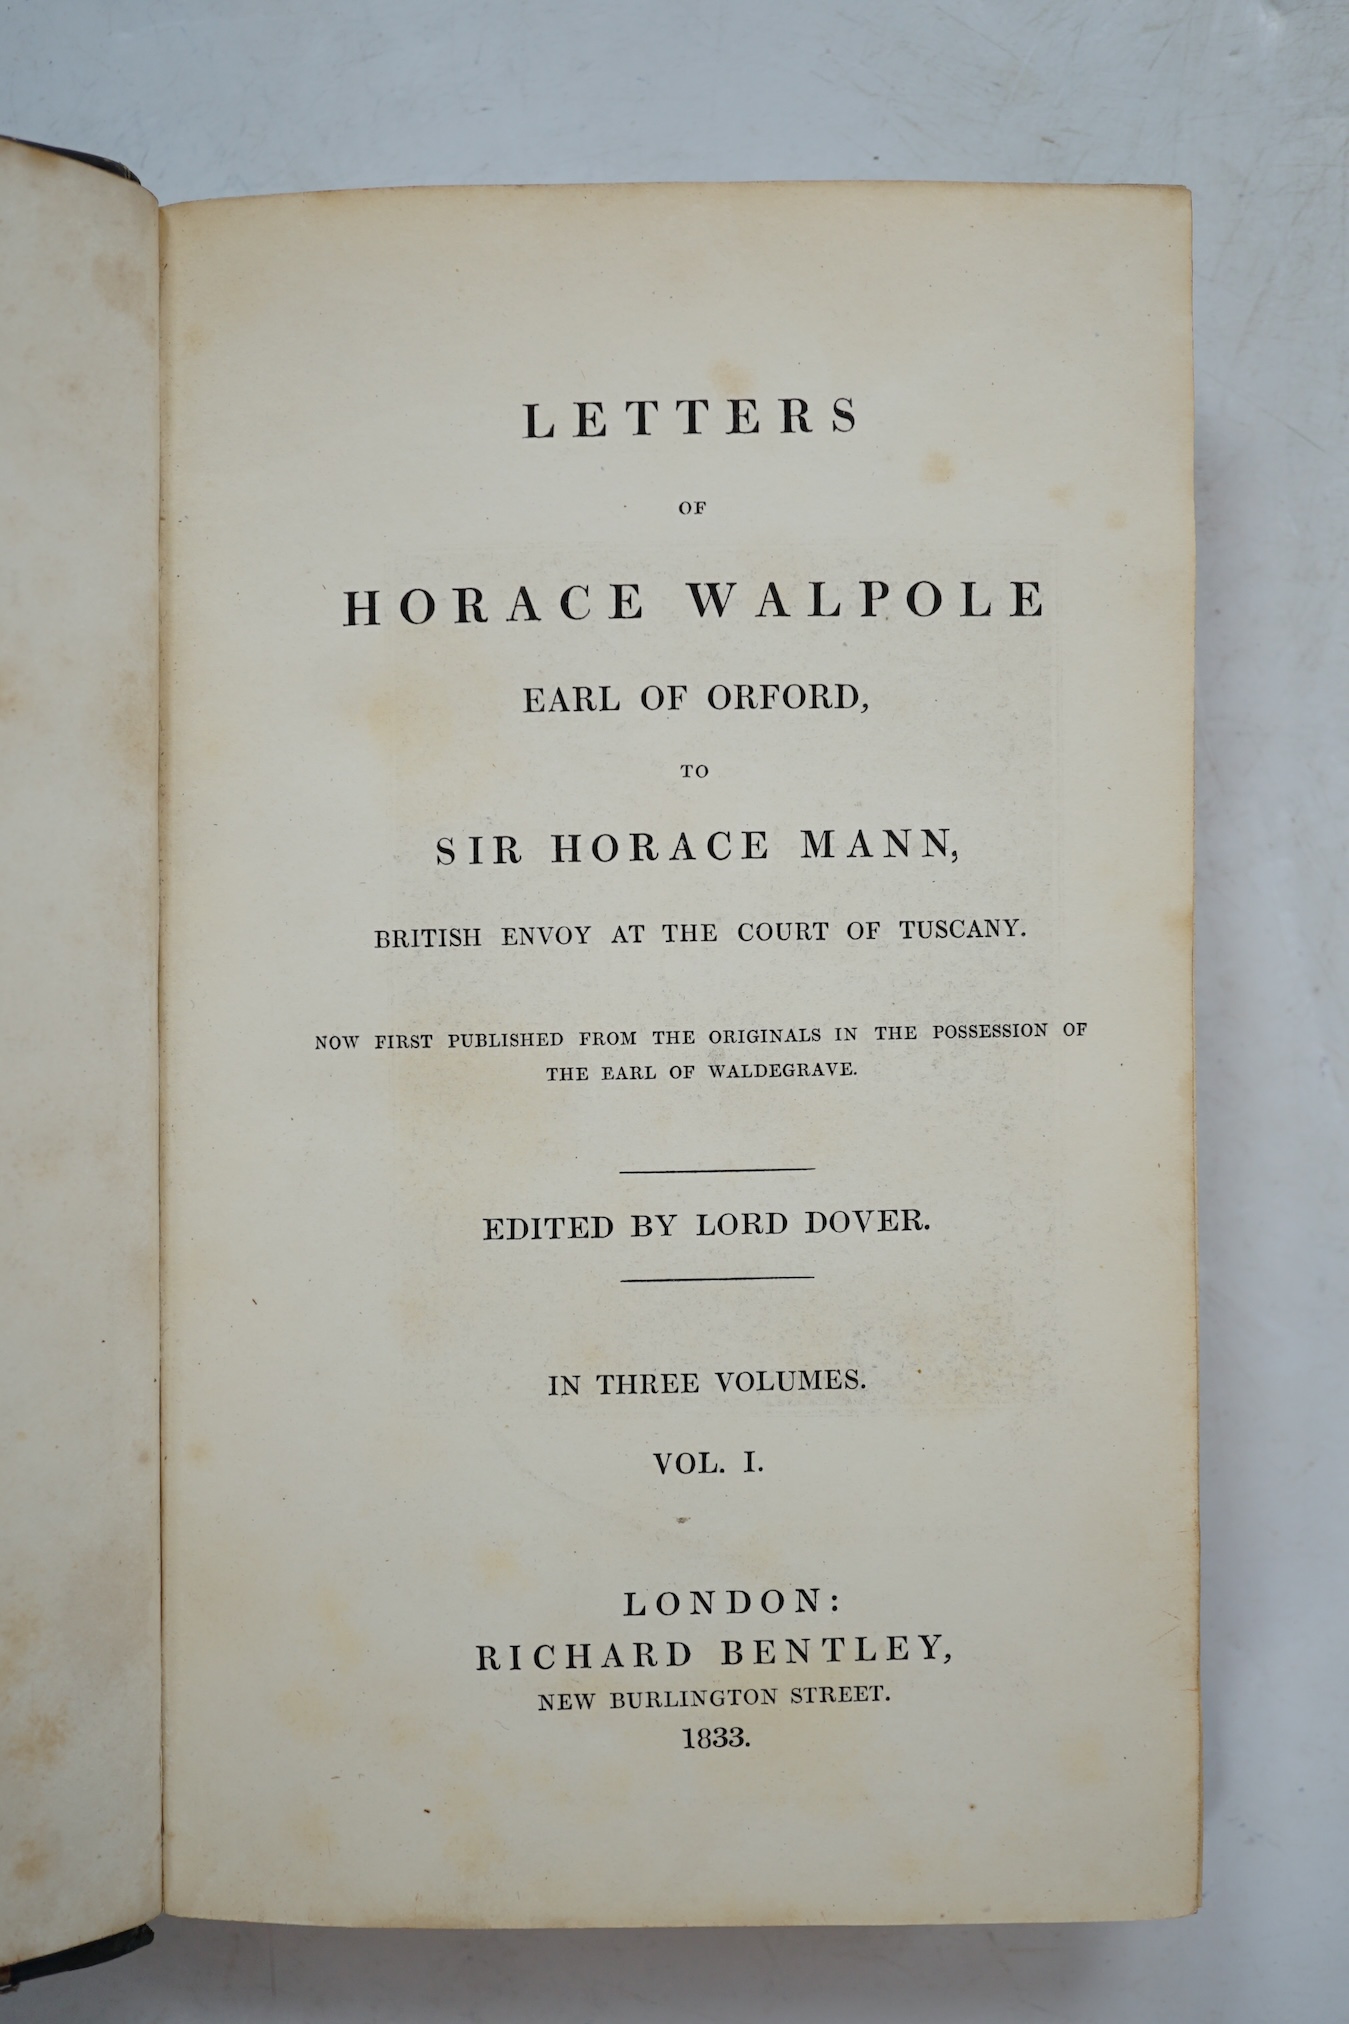 Walpole, Horace, Earl of Orford - Letters of Horace Walpole, Earl of Orford to Sir Horace Mann, British Envoy at the Court of Tuscany, 3 vols, 8vo, half green morocco with marbled boards, engraved frontis portrait, Richa